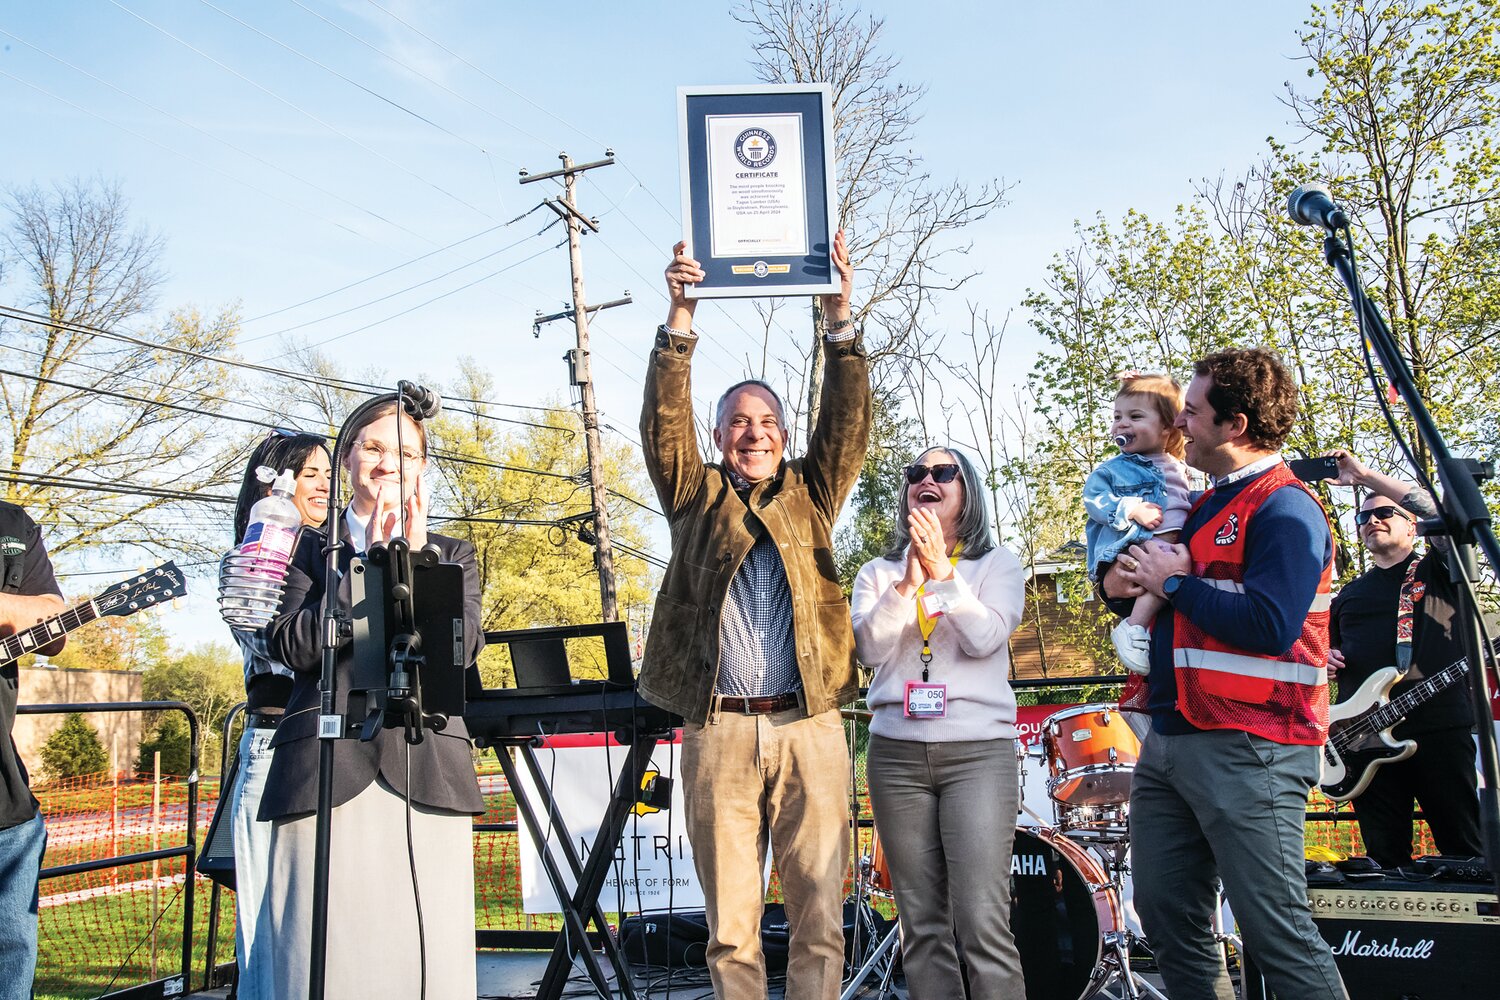 Tague Lumber celebrates its position as an “Officially Amazing” Guinness World Records record holder.